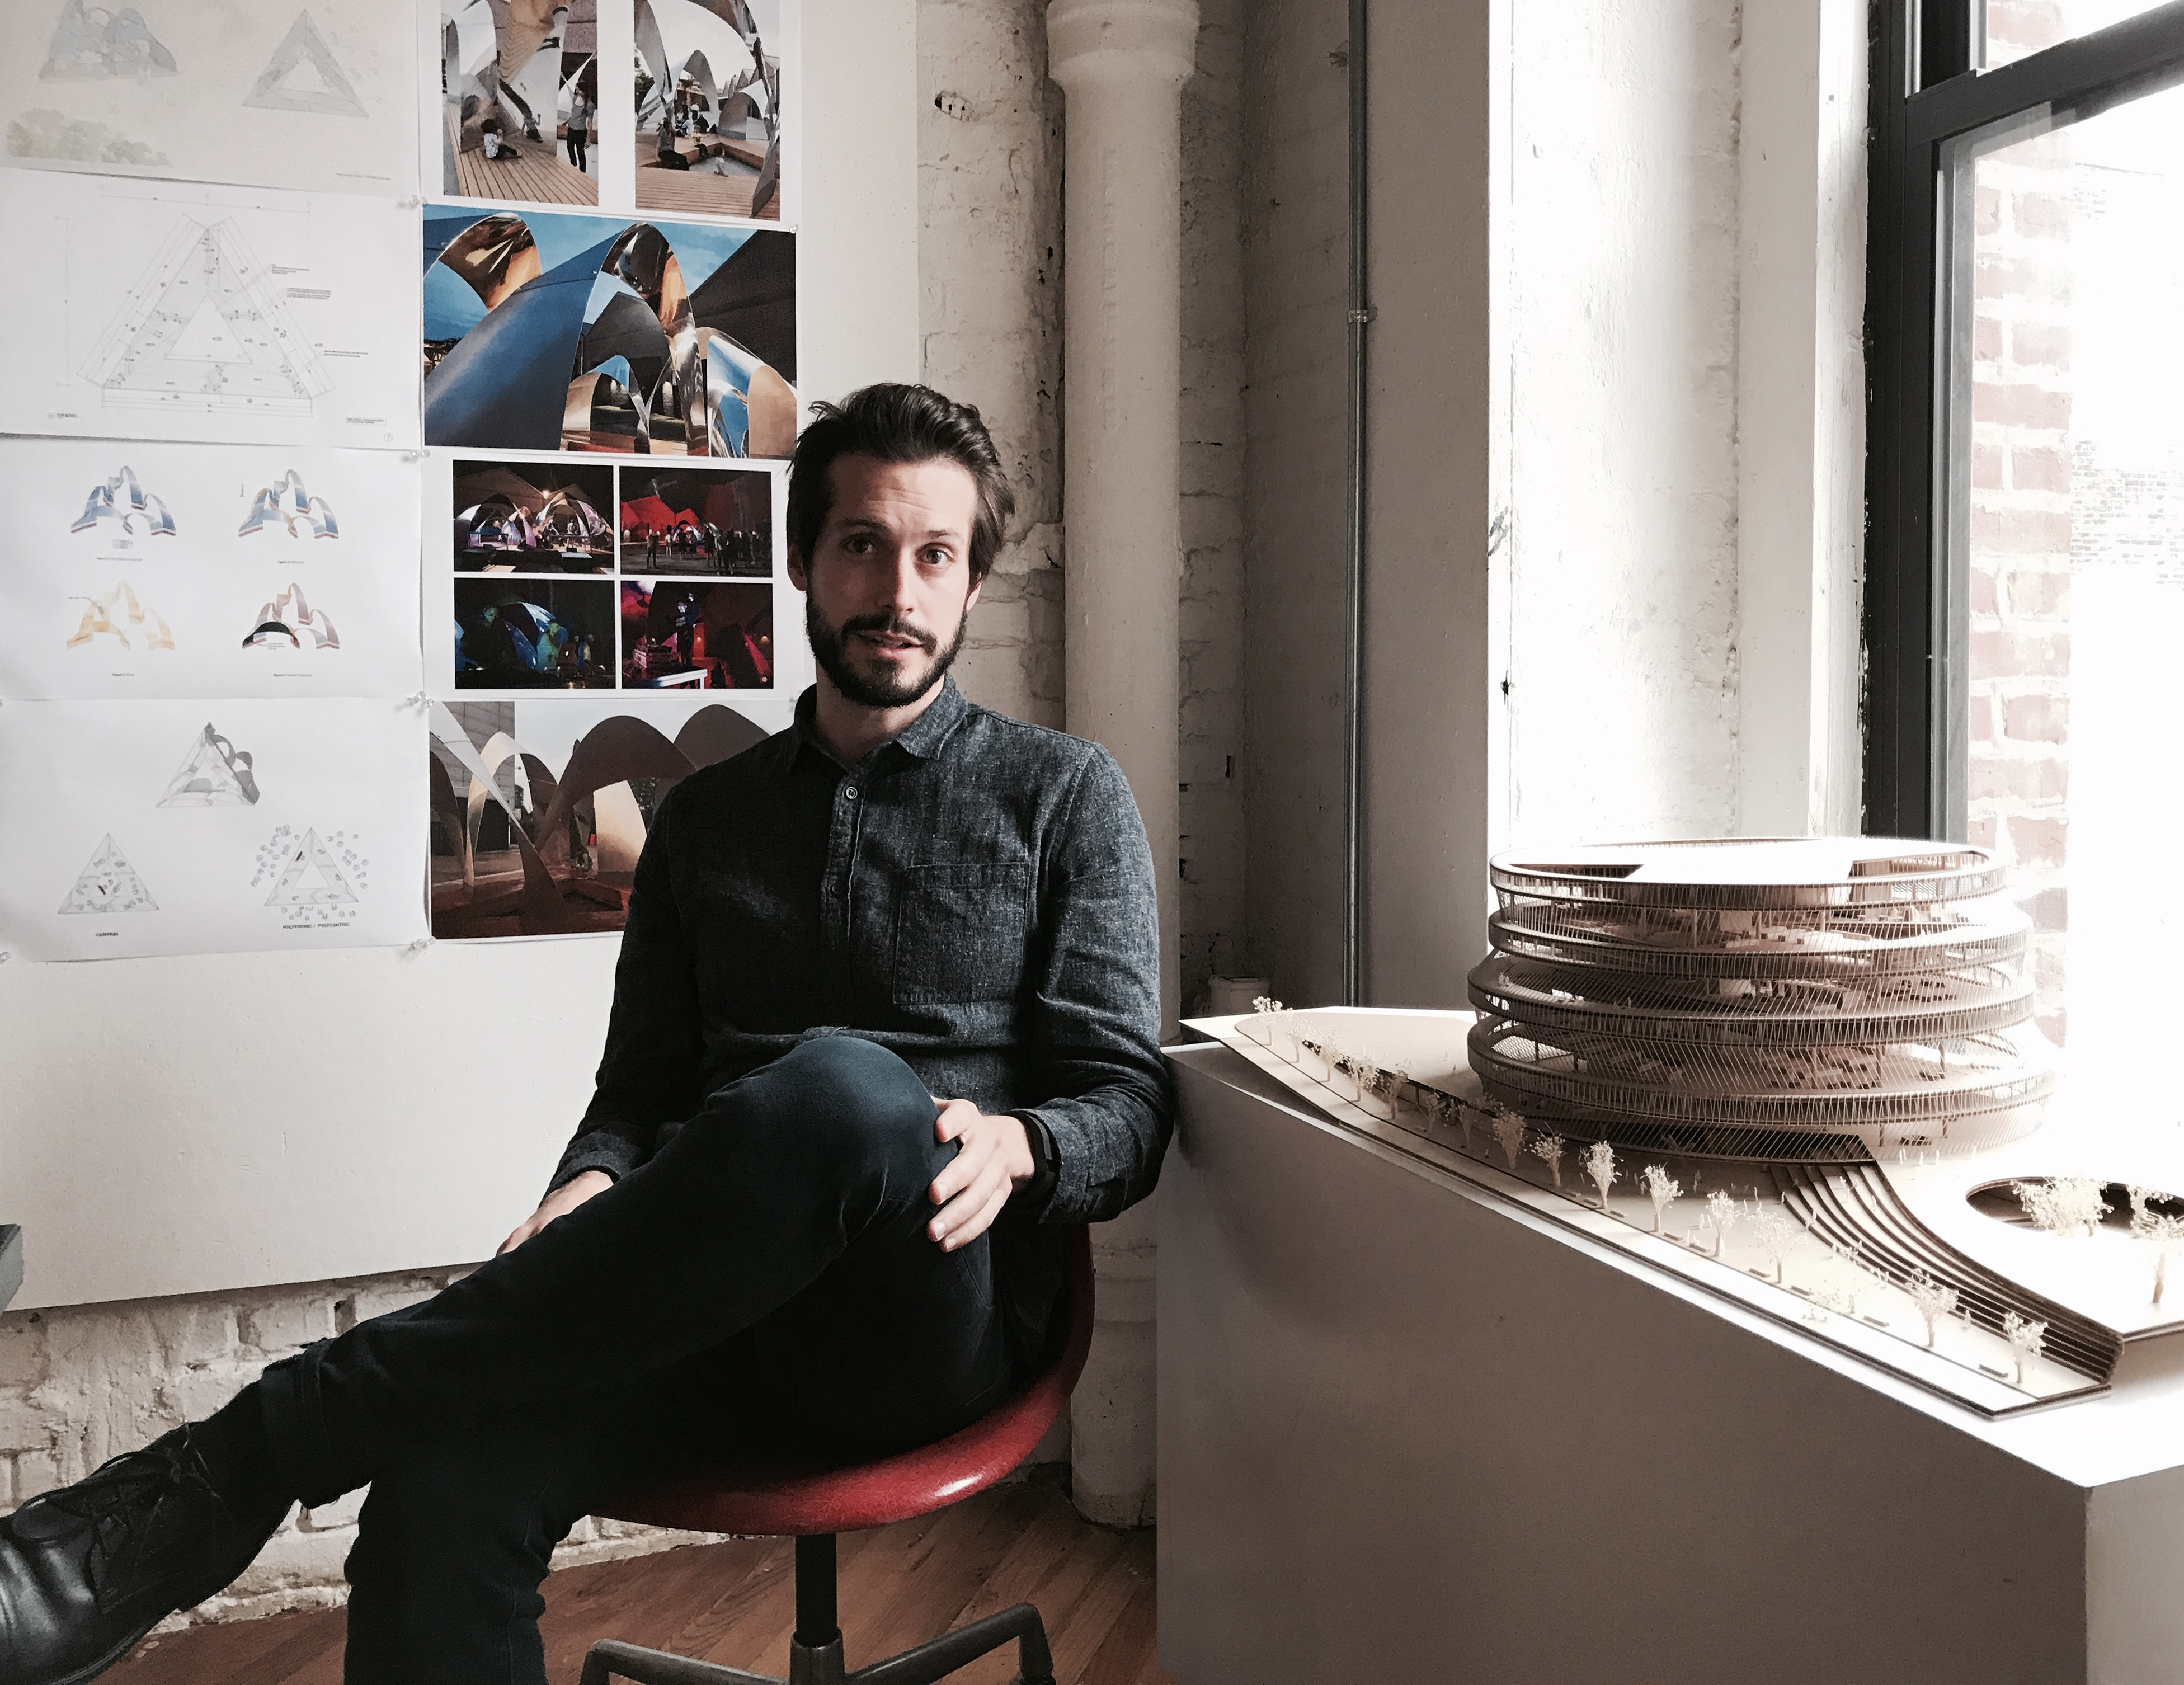 Albert Figueras, a Catalan architect living and working in New York